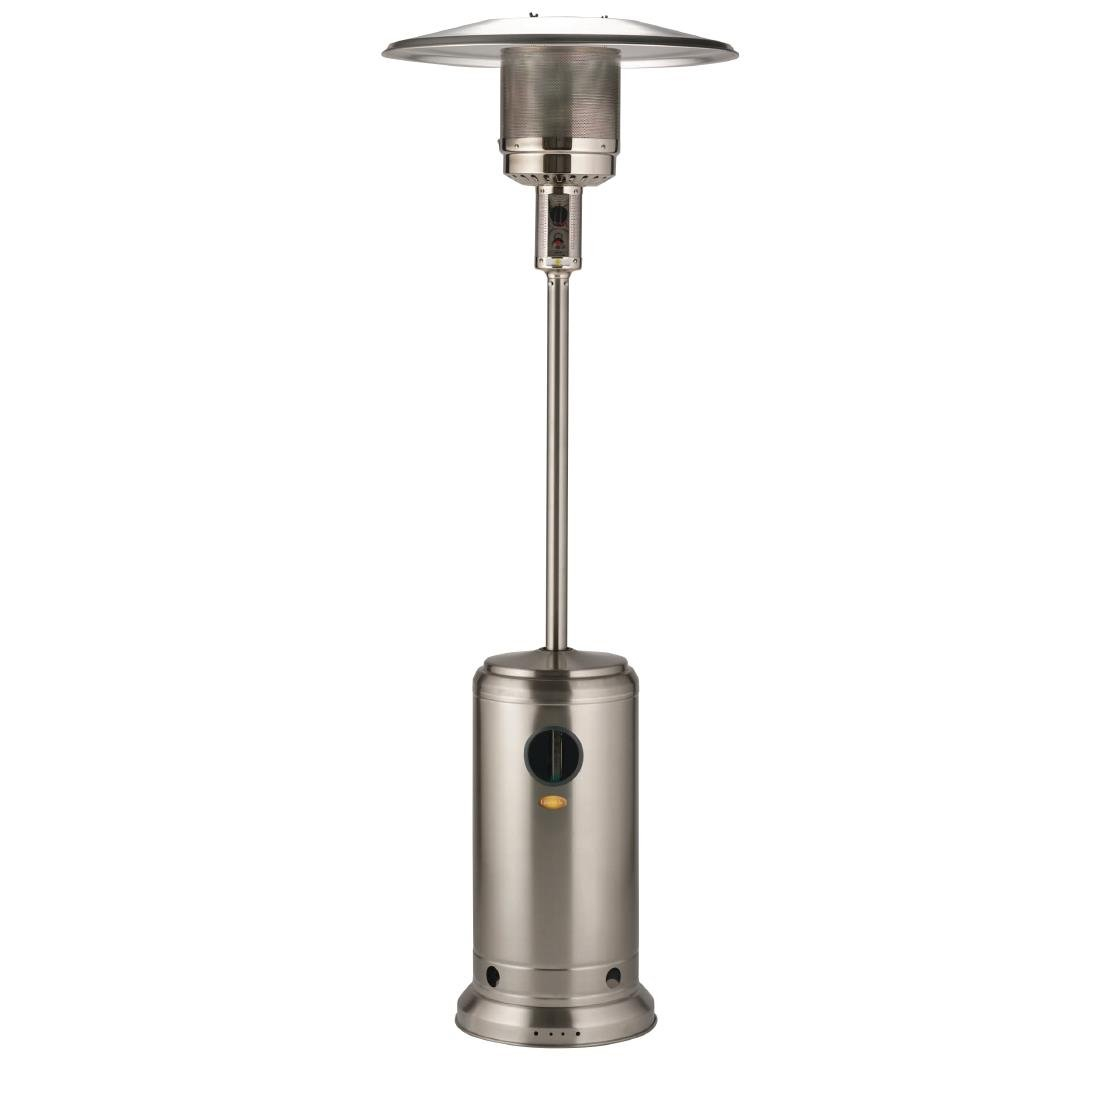 Lifestyle Edelweiss Stainless Steel Patio Heater 13kw pertaining to dimensions 1100 X 1100